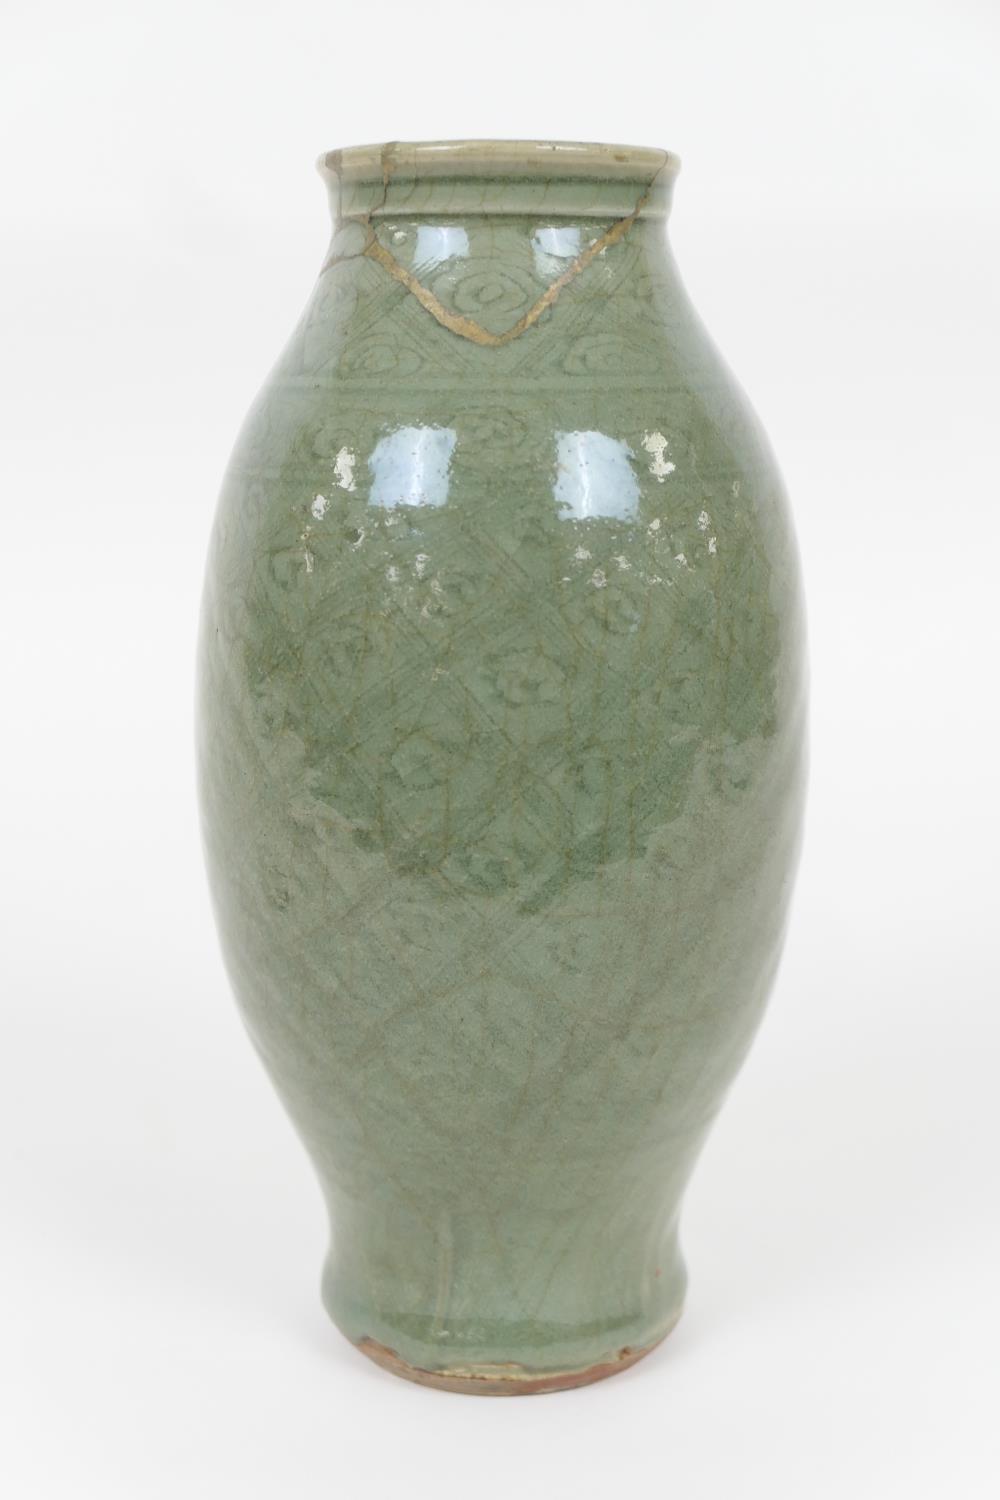 Chinese celadon vase, Ming Dynasty (1368-1644), ovoid form with carved lingzhi and trellis design